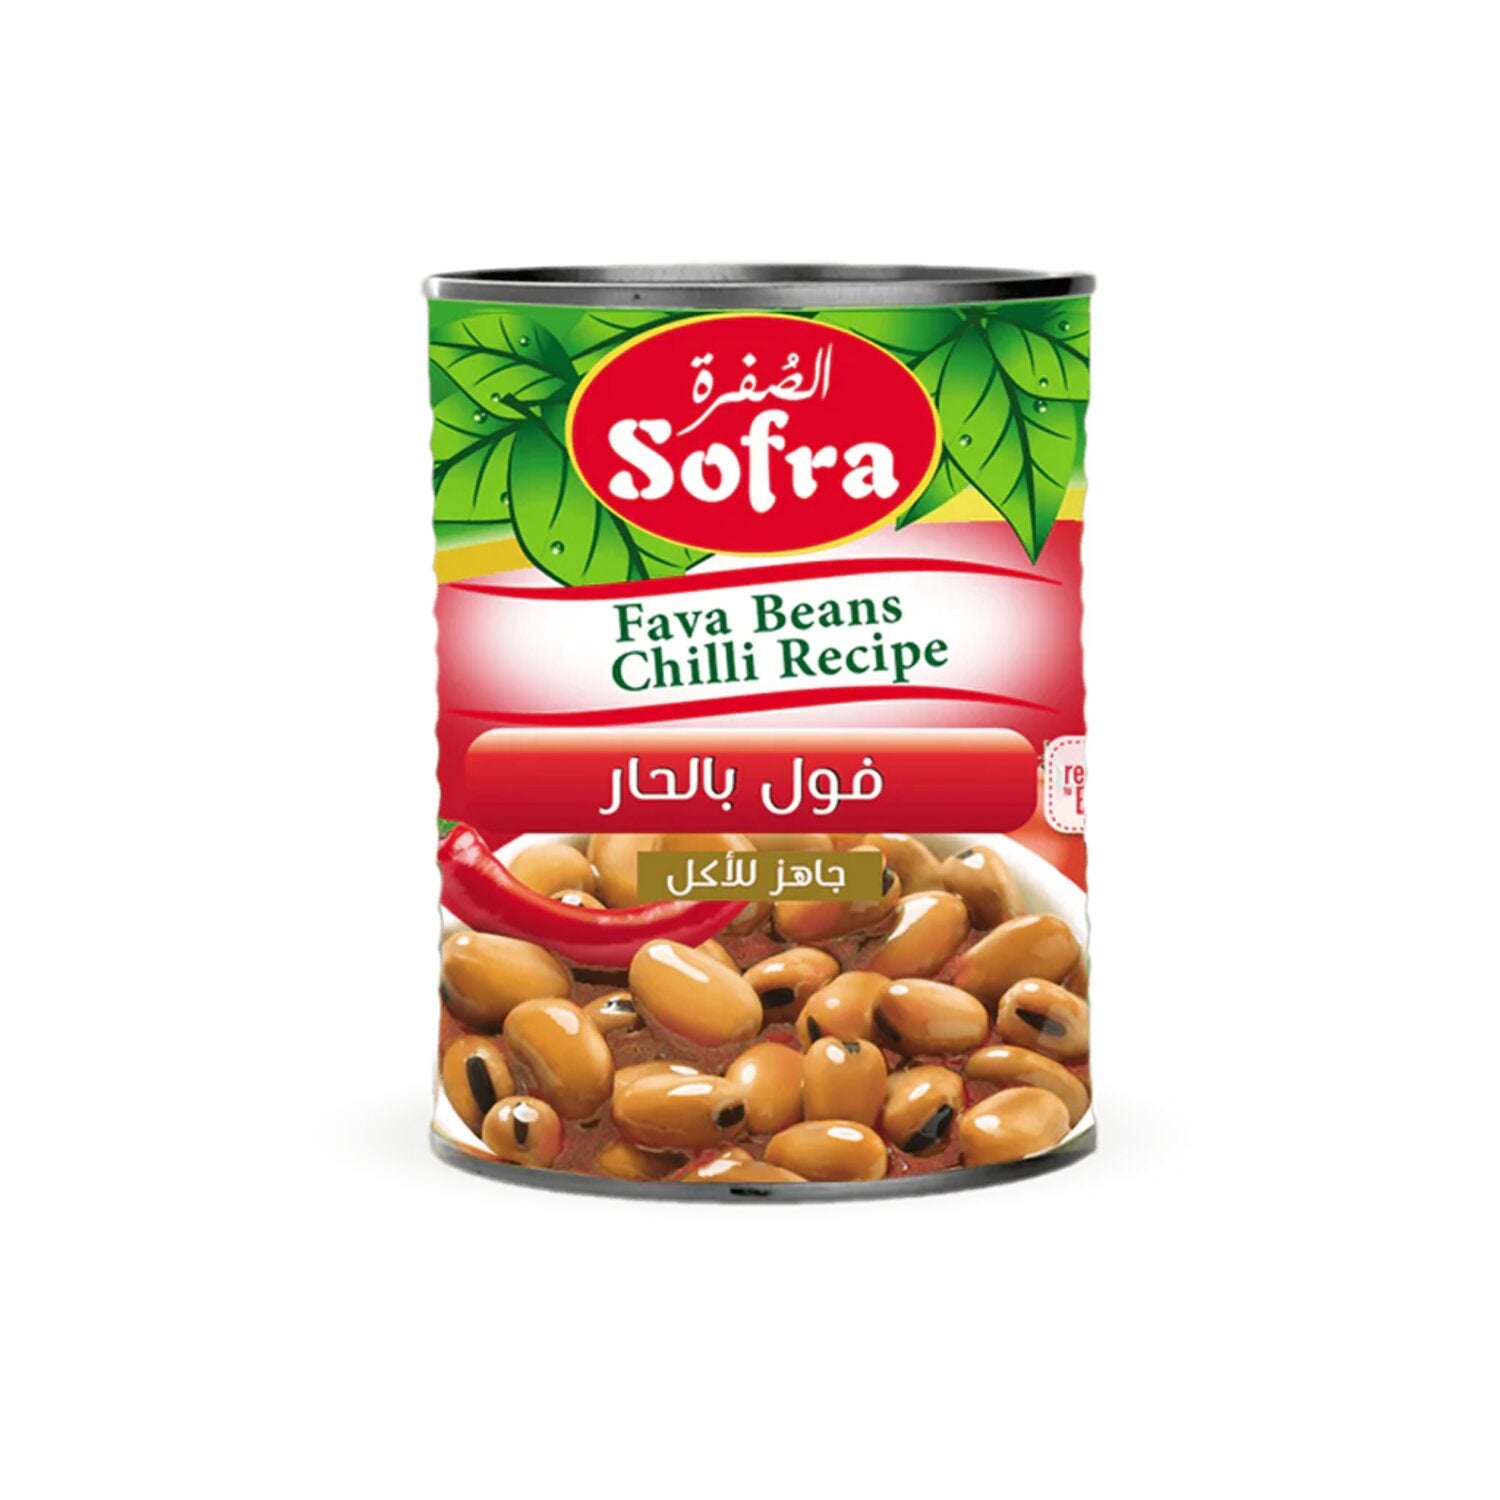 Offer Sofra Peeled Fava Beans W ith Chilli 400g X 2 pcs